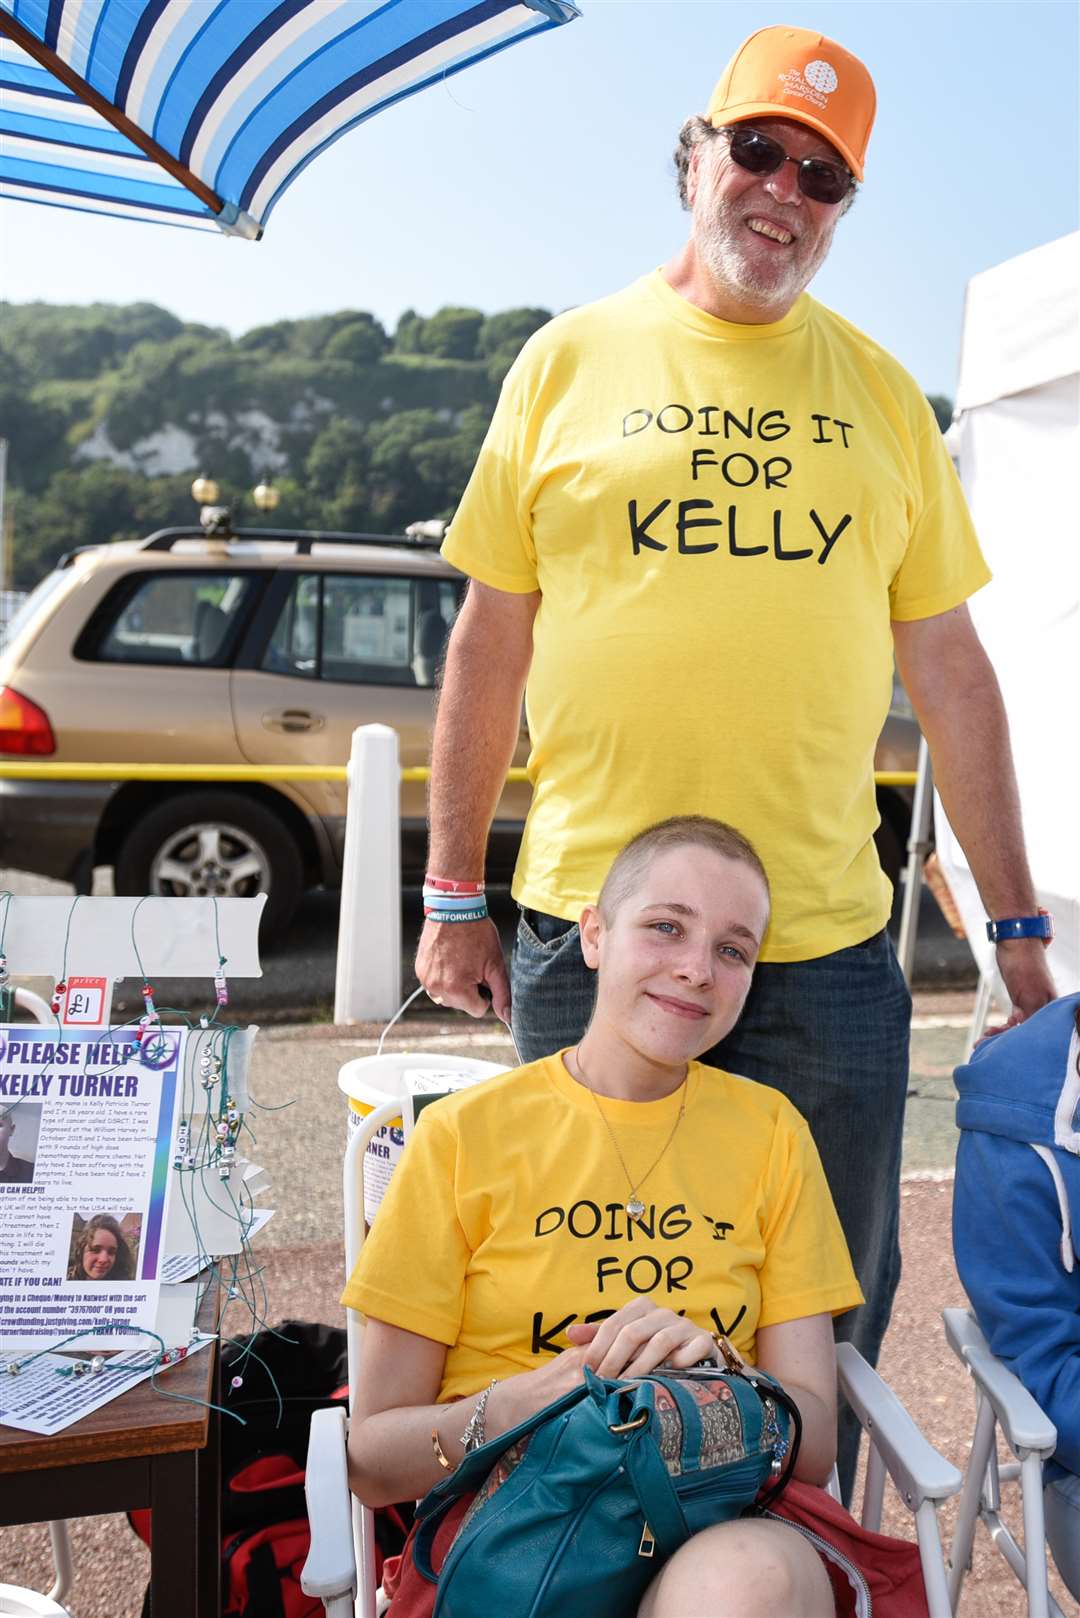 Martin and Kelly Turner with Doing it For Kelly T-shirts